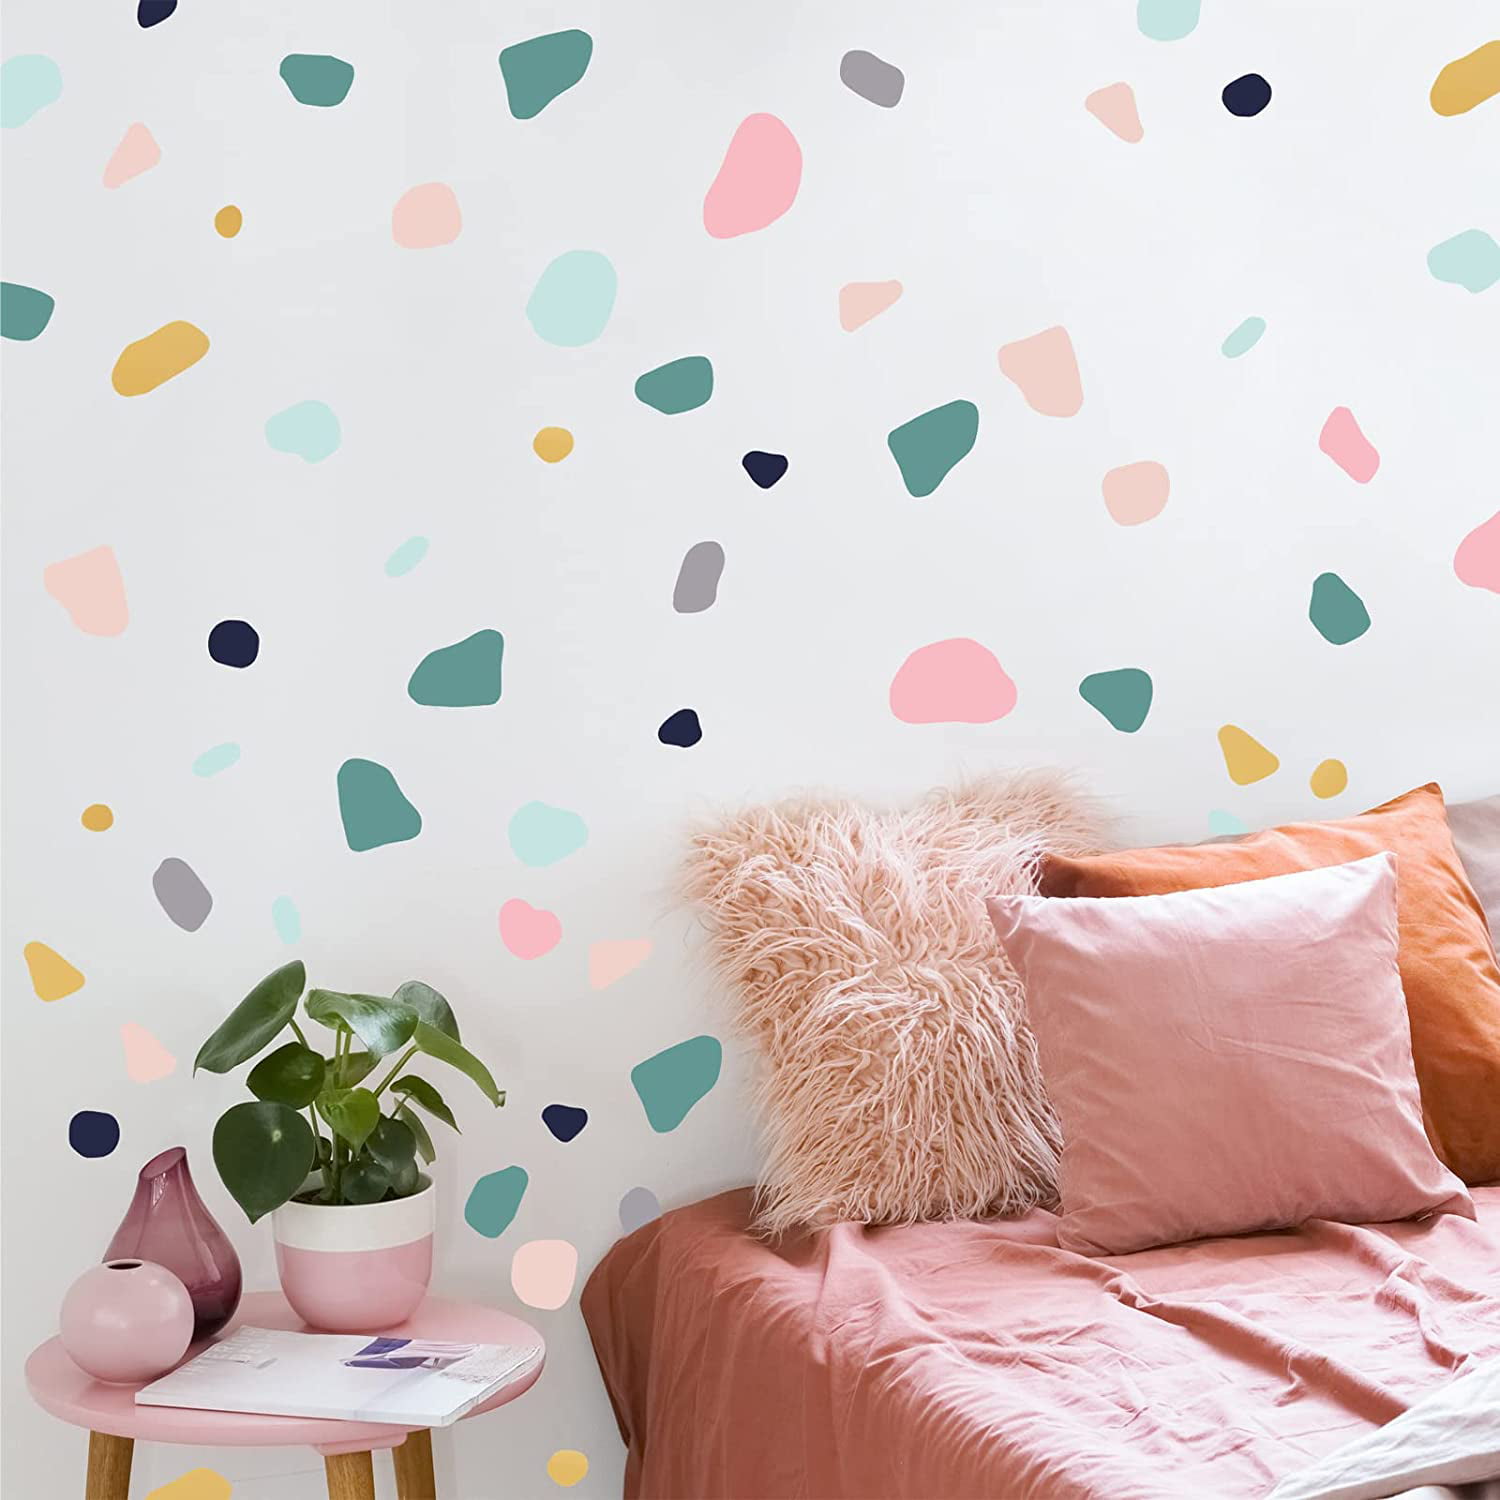 Gold Polka Dot Decal A polka in the room 2.5 Dot sticker Kids wall decoration gift baby room decal Removable wall paper Polka Dot Wall Decal 